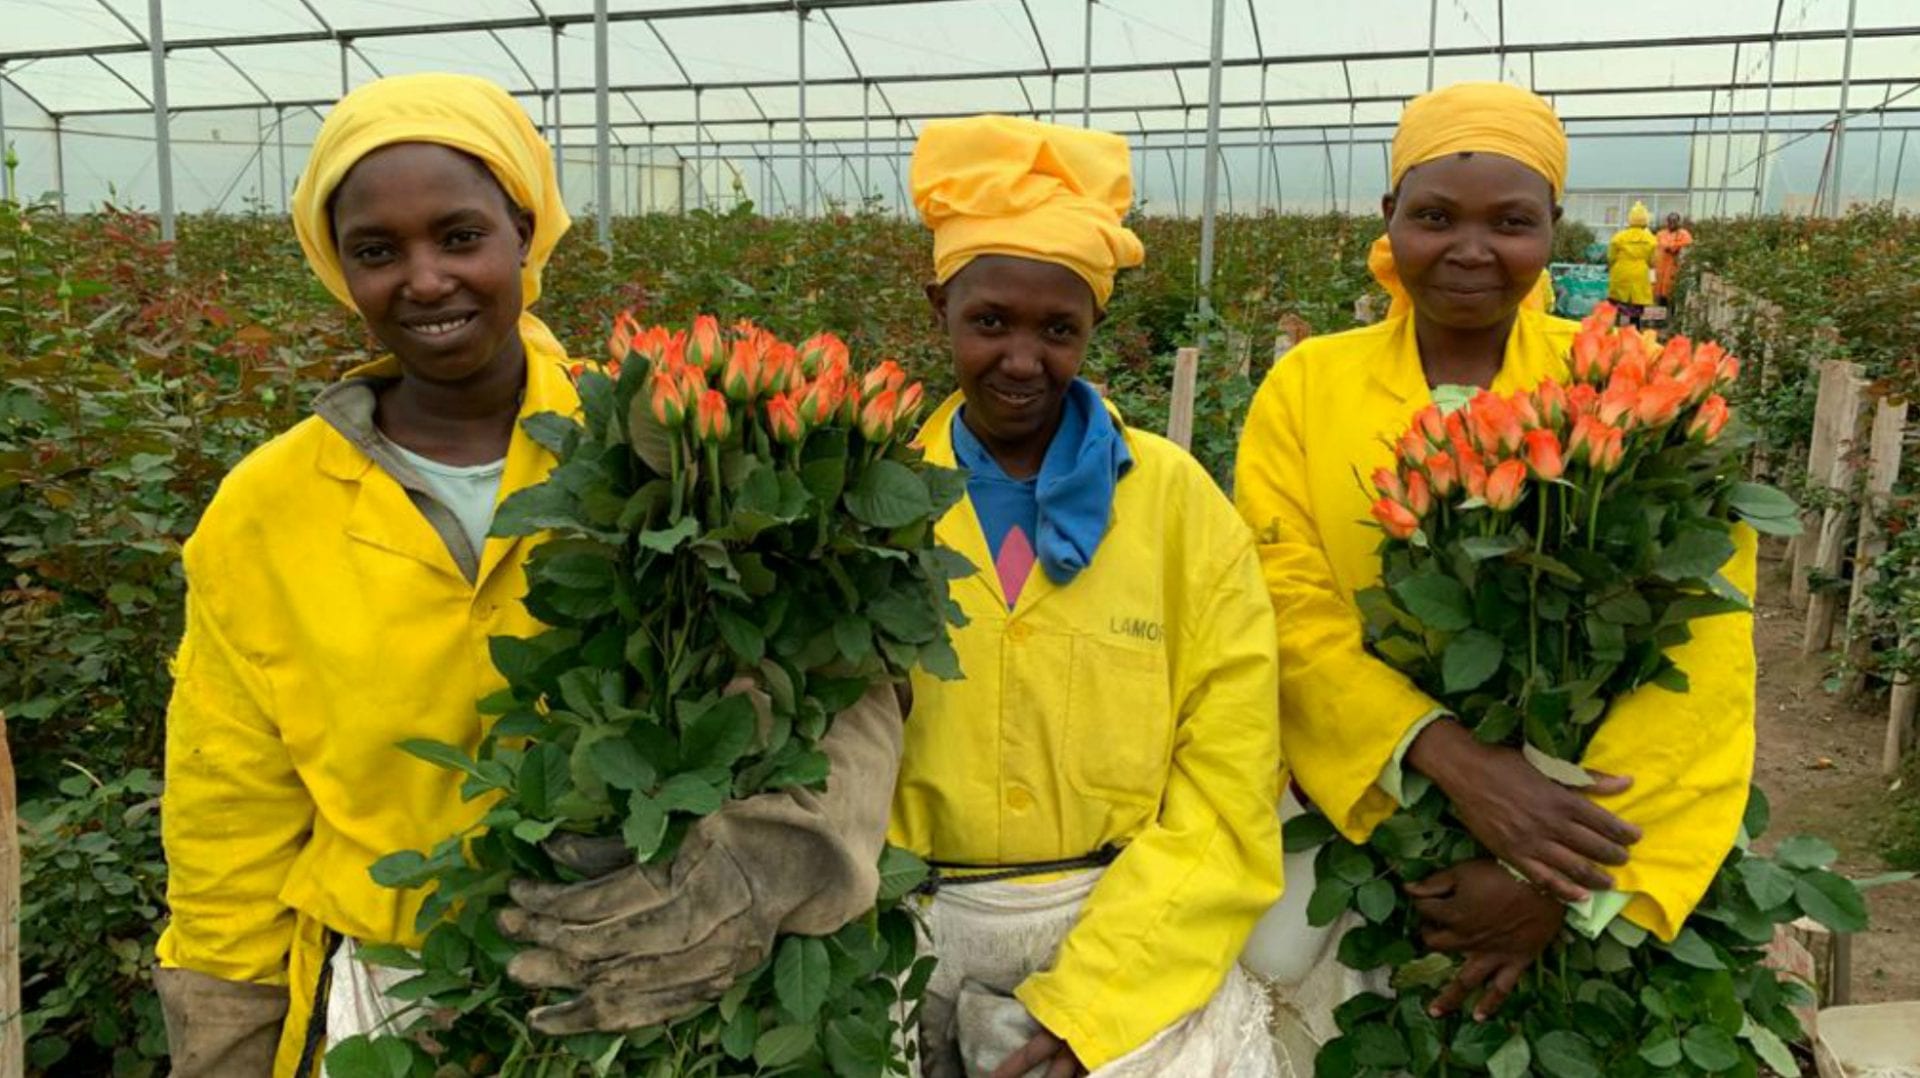 As Covid-19 devastates the global flower trade, we speak to a British florist and the Kenyan flower farmer thousands of miles away who supplies her to find out how their lives have been impacted